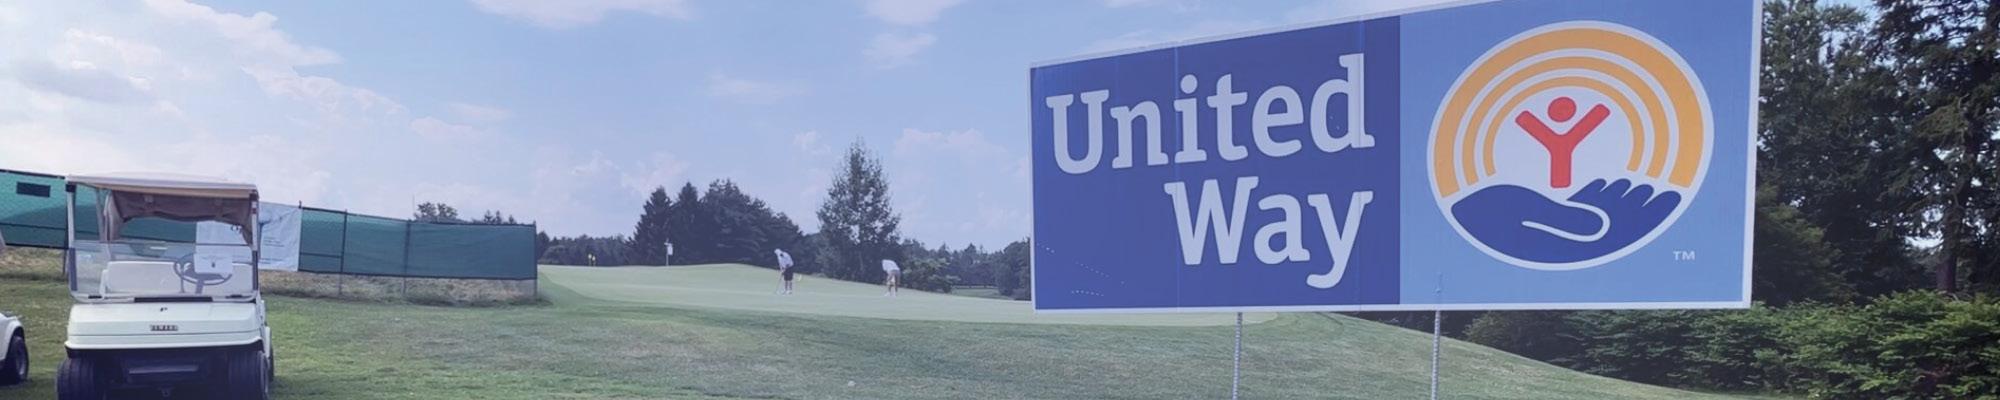 United Way lawn sign on the golf course with golfers in the background 